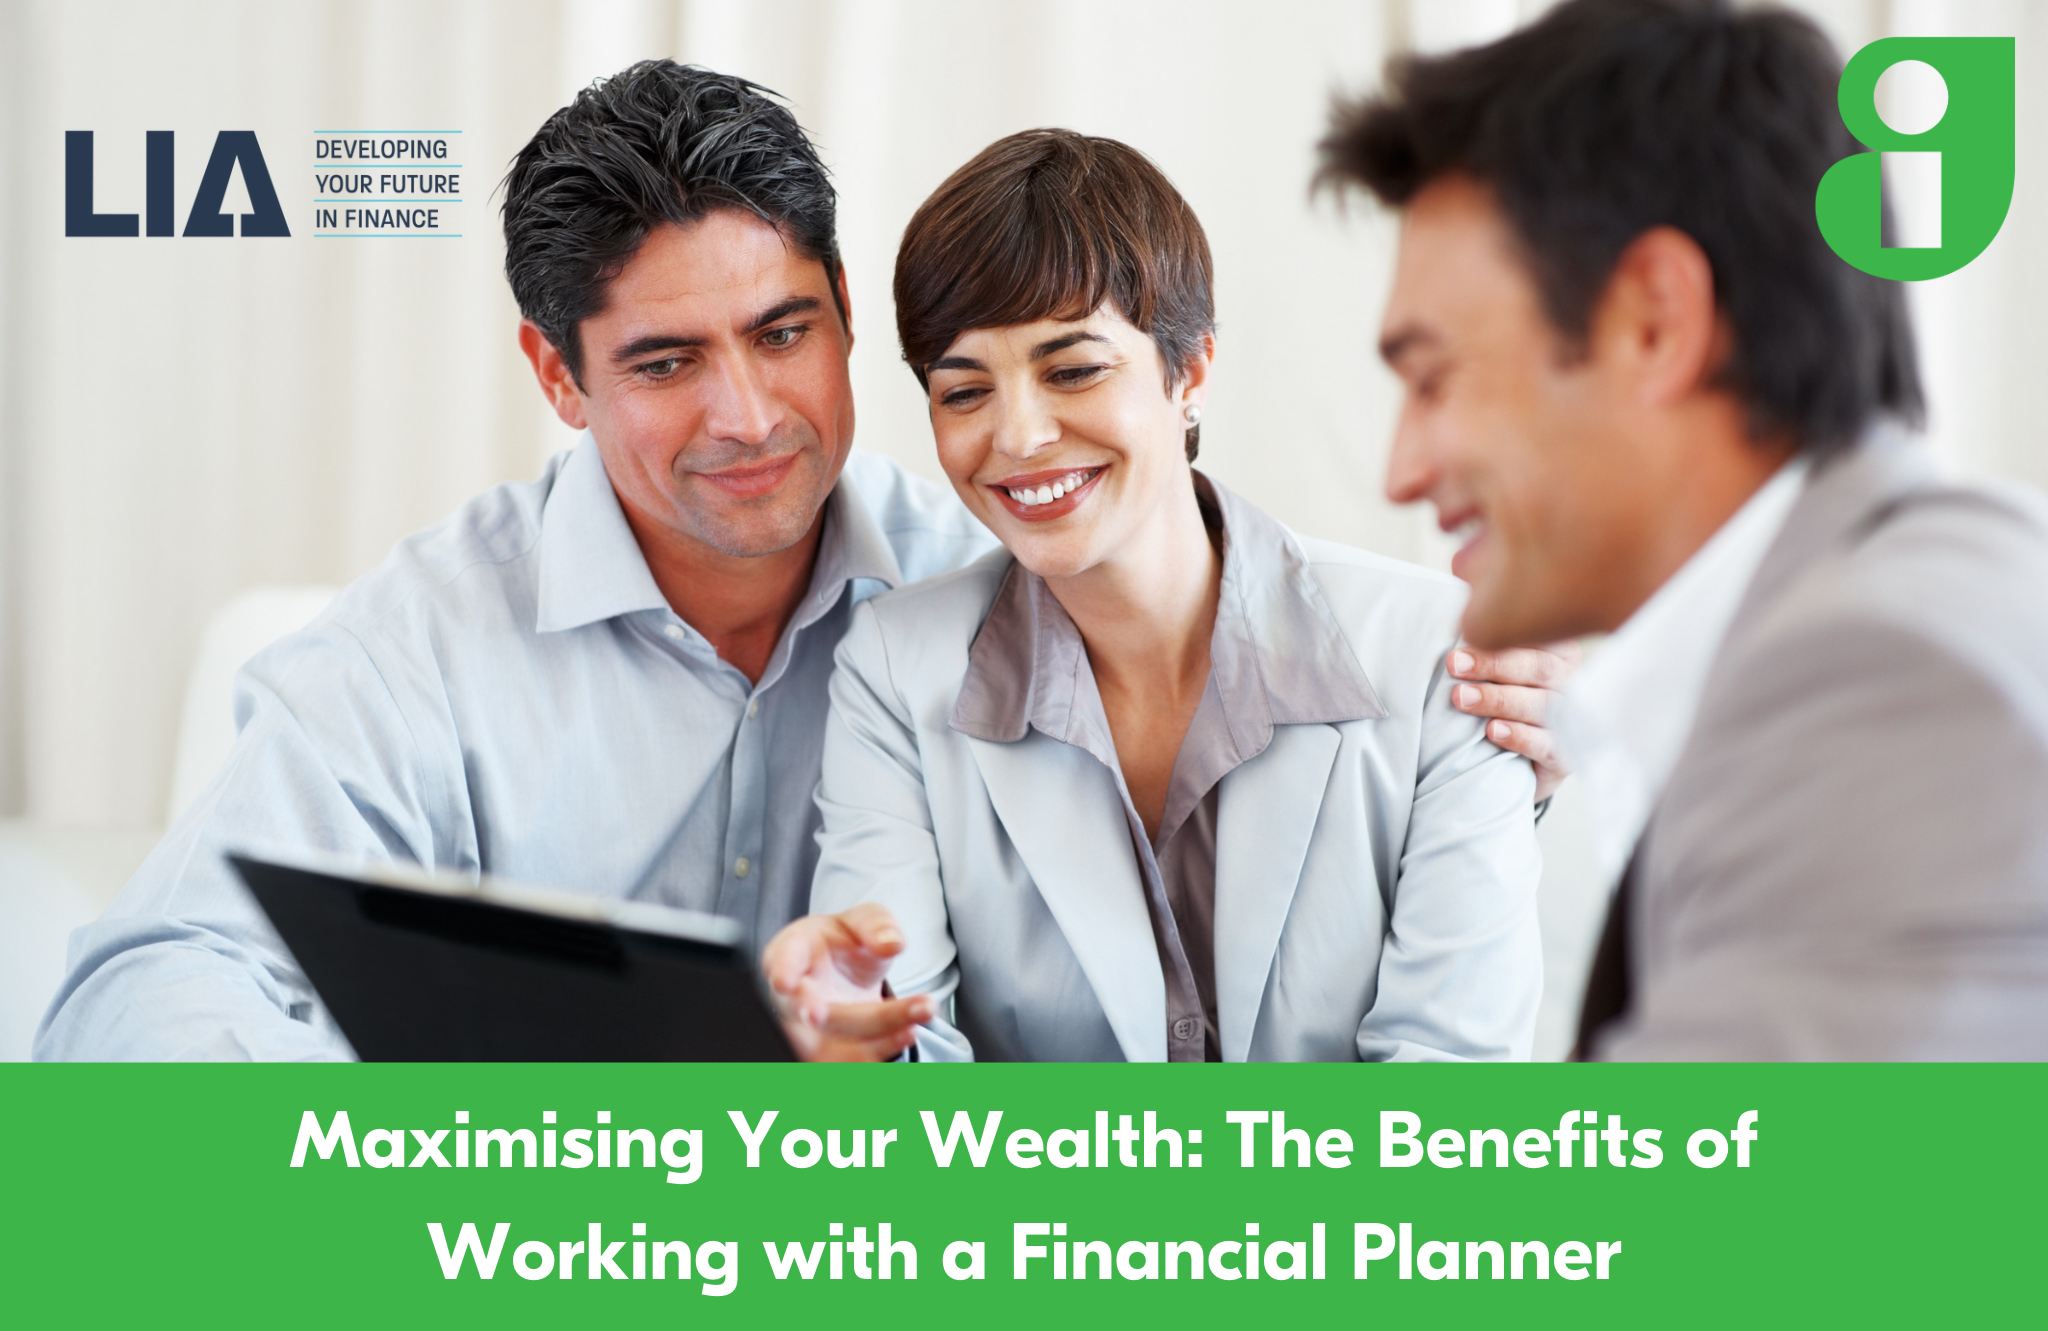 Maximising Your Wealth: The Benefits of Working with a Financial Planner